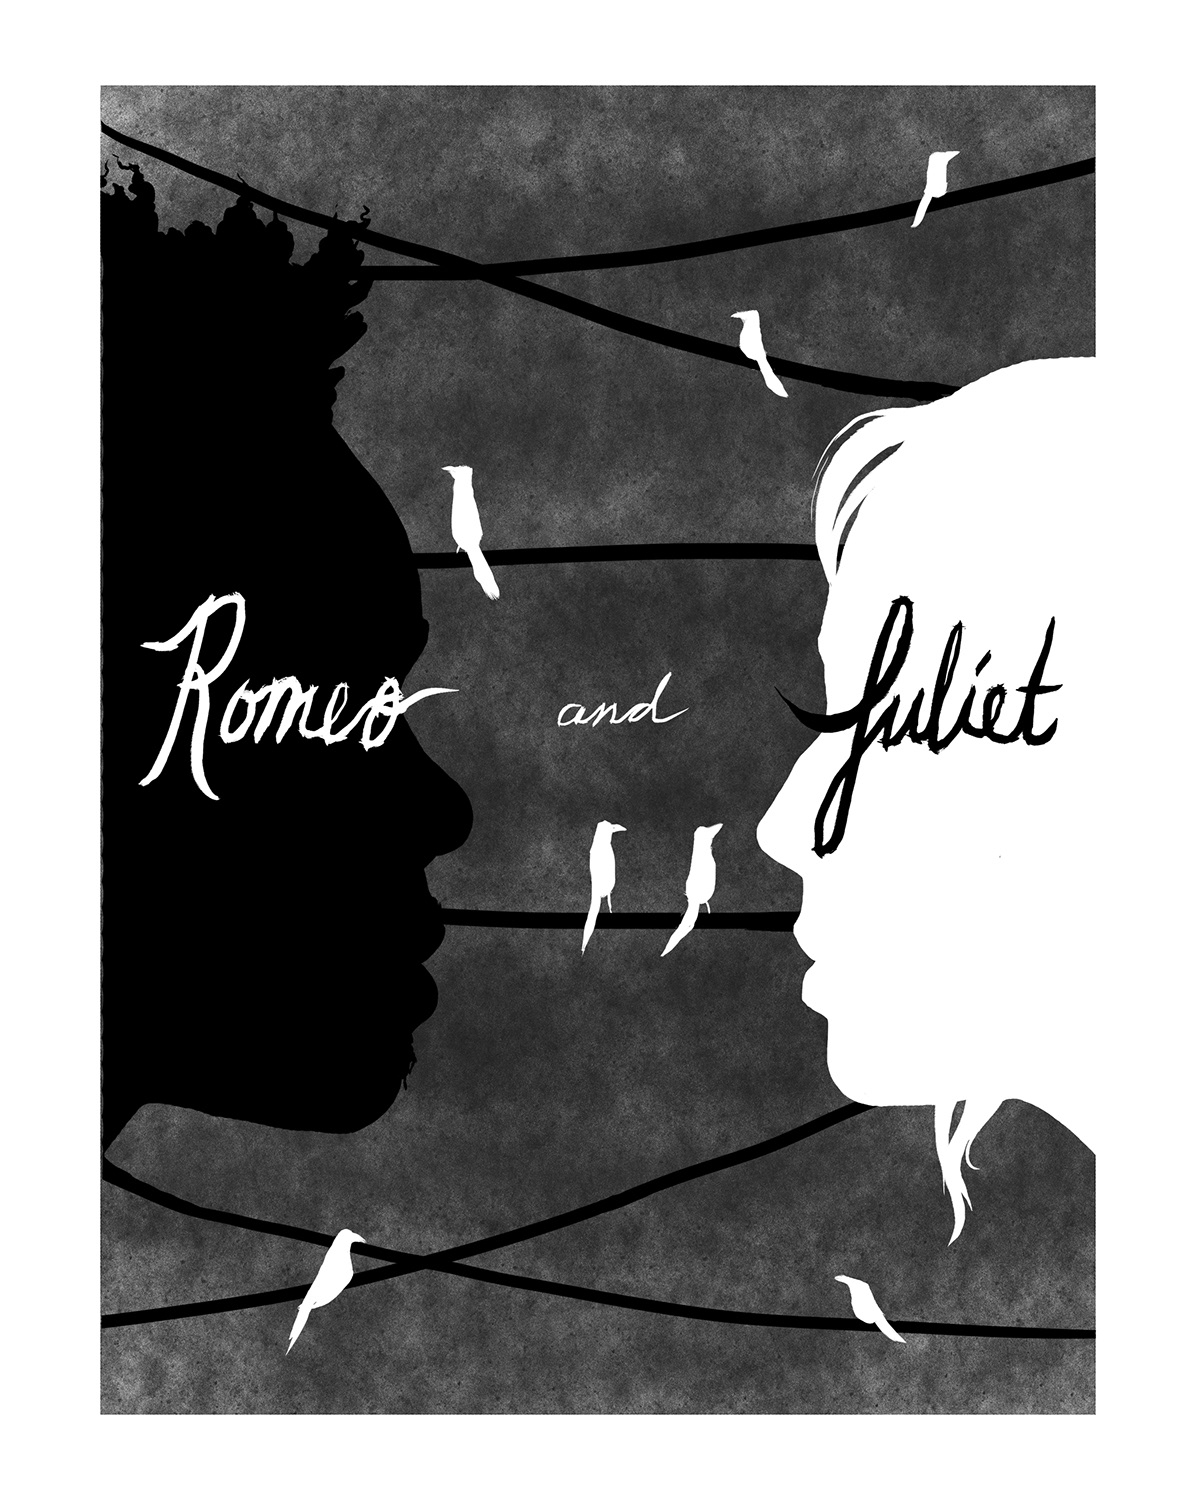 Romeo and Juliet shakespeare updated series Handlettering HAND LETTERING